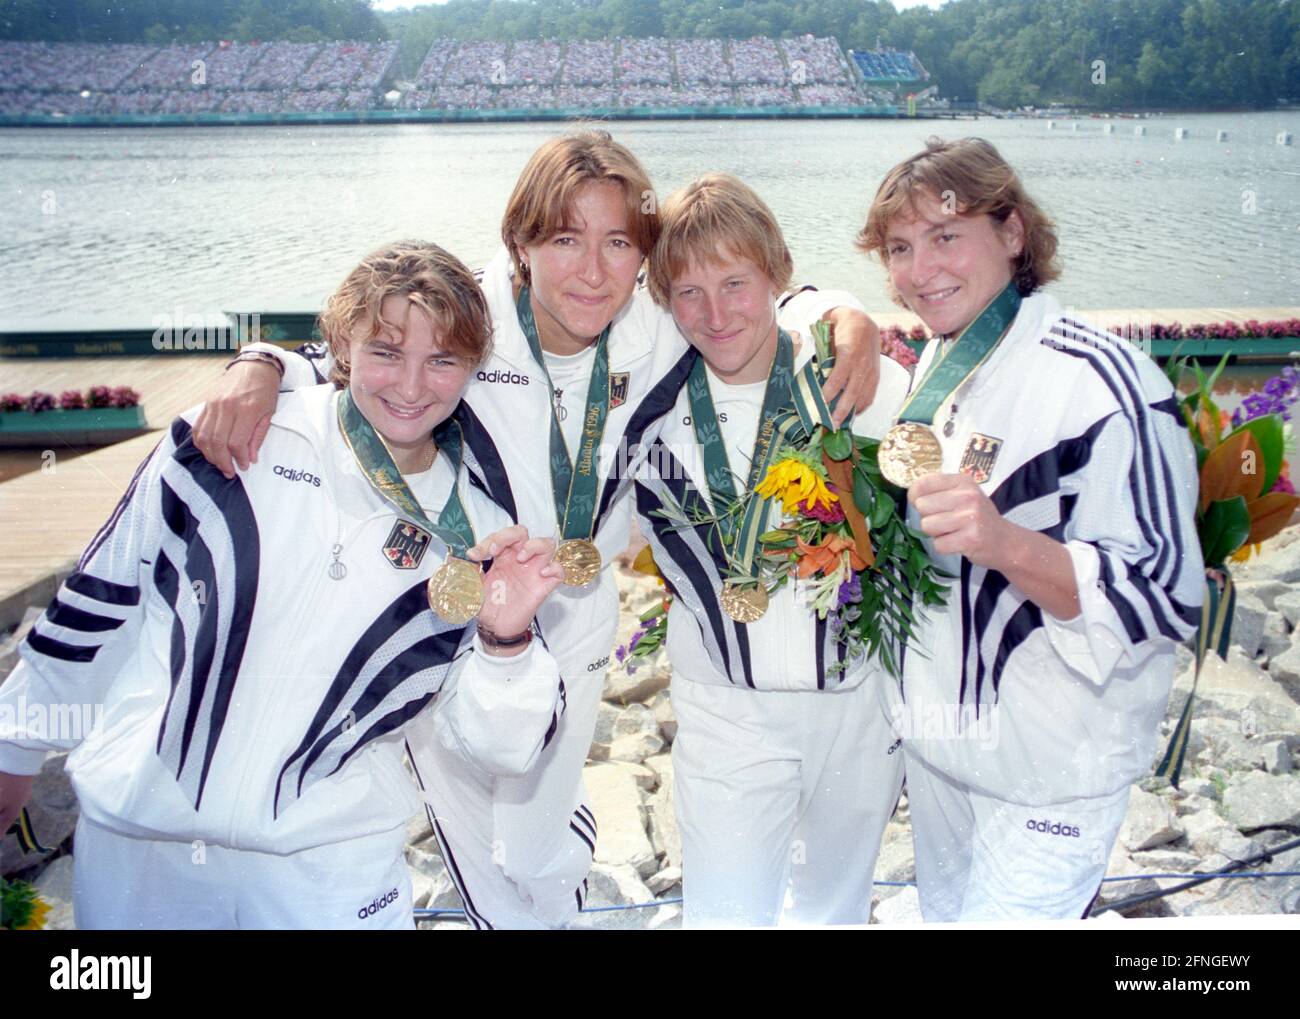 Olympic Games 1996 in Atlanta. Canoe racing, award ceremony women's four-man kayak: Winner Germany with (from left) Manuela Mucke, Ramona Portwich, Anett Schuck and Birgit Fischer 03.08.1996 [automated translation] Stock Photo